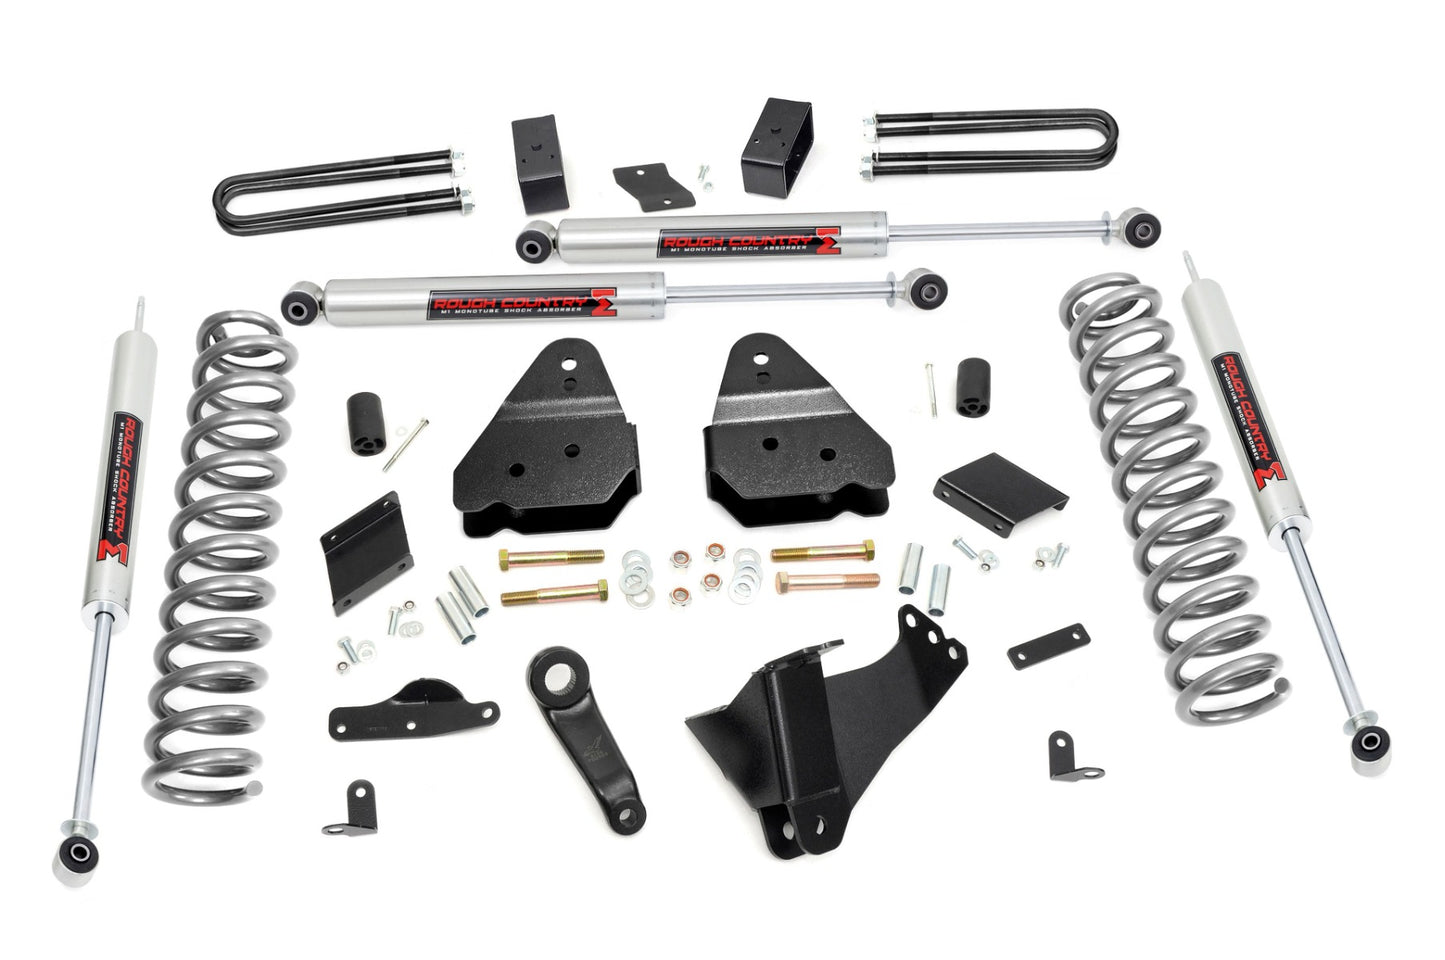 Rough Country (53040) 4.5 Inch Lift Kit | No OVLD | M1 | Ford F-250 Super Duty 4WD (2011-2014)